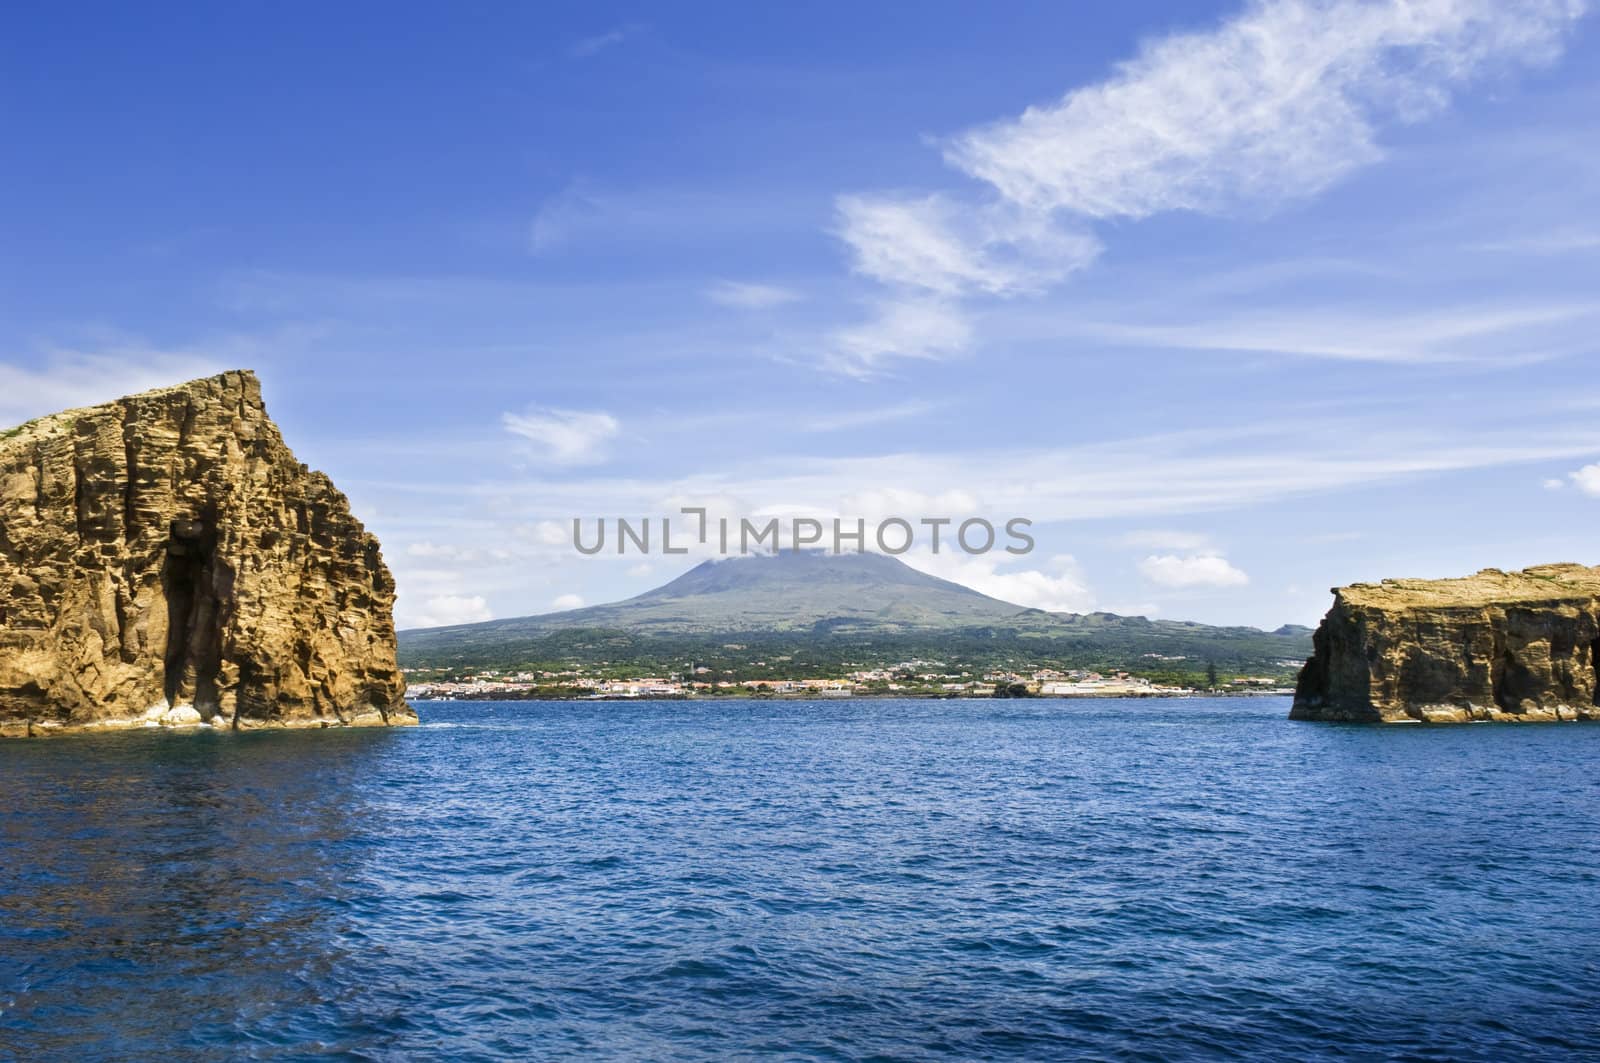 View of Pico Island with two islets in the foreground by mrfotos